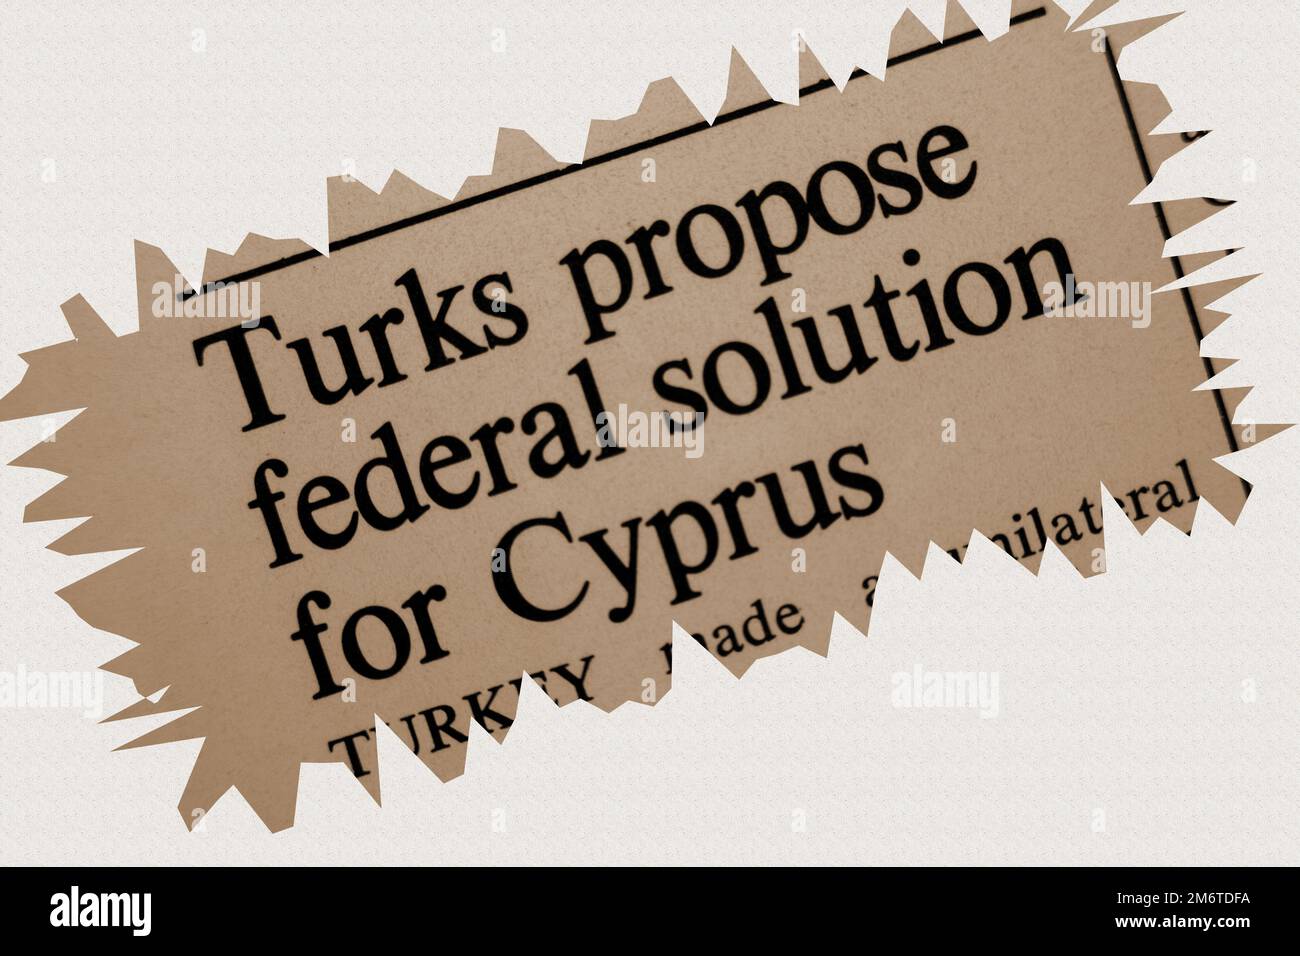 Turks propose federal solution for Cyprus - news story from 1975 newspaper headline article title with overlay in sepia Stock Photo